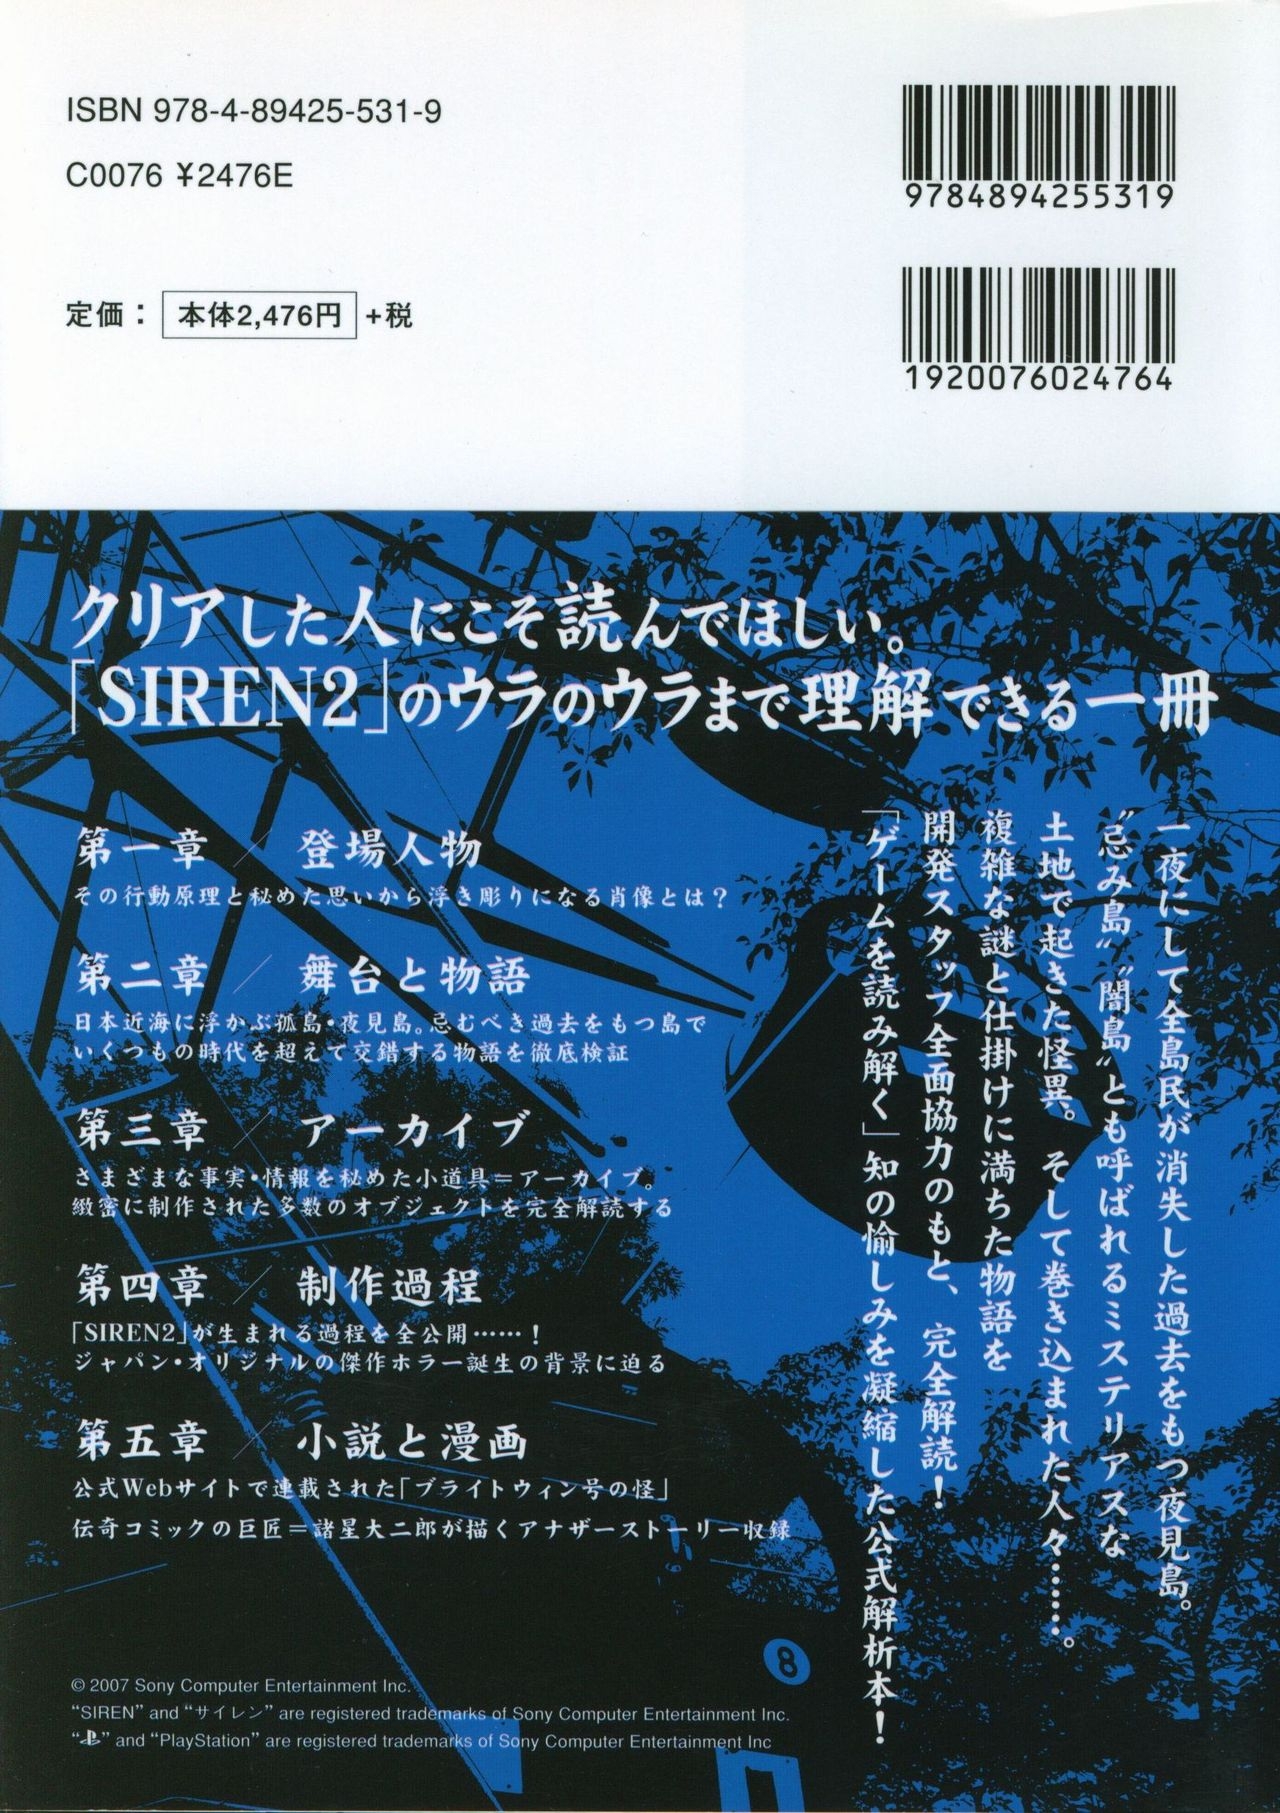 Siren 2 Maniacs Official Complete Analysis Book 267